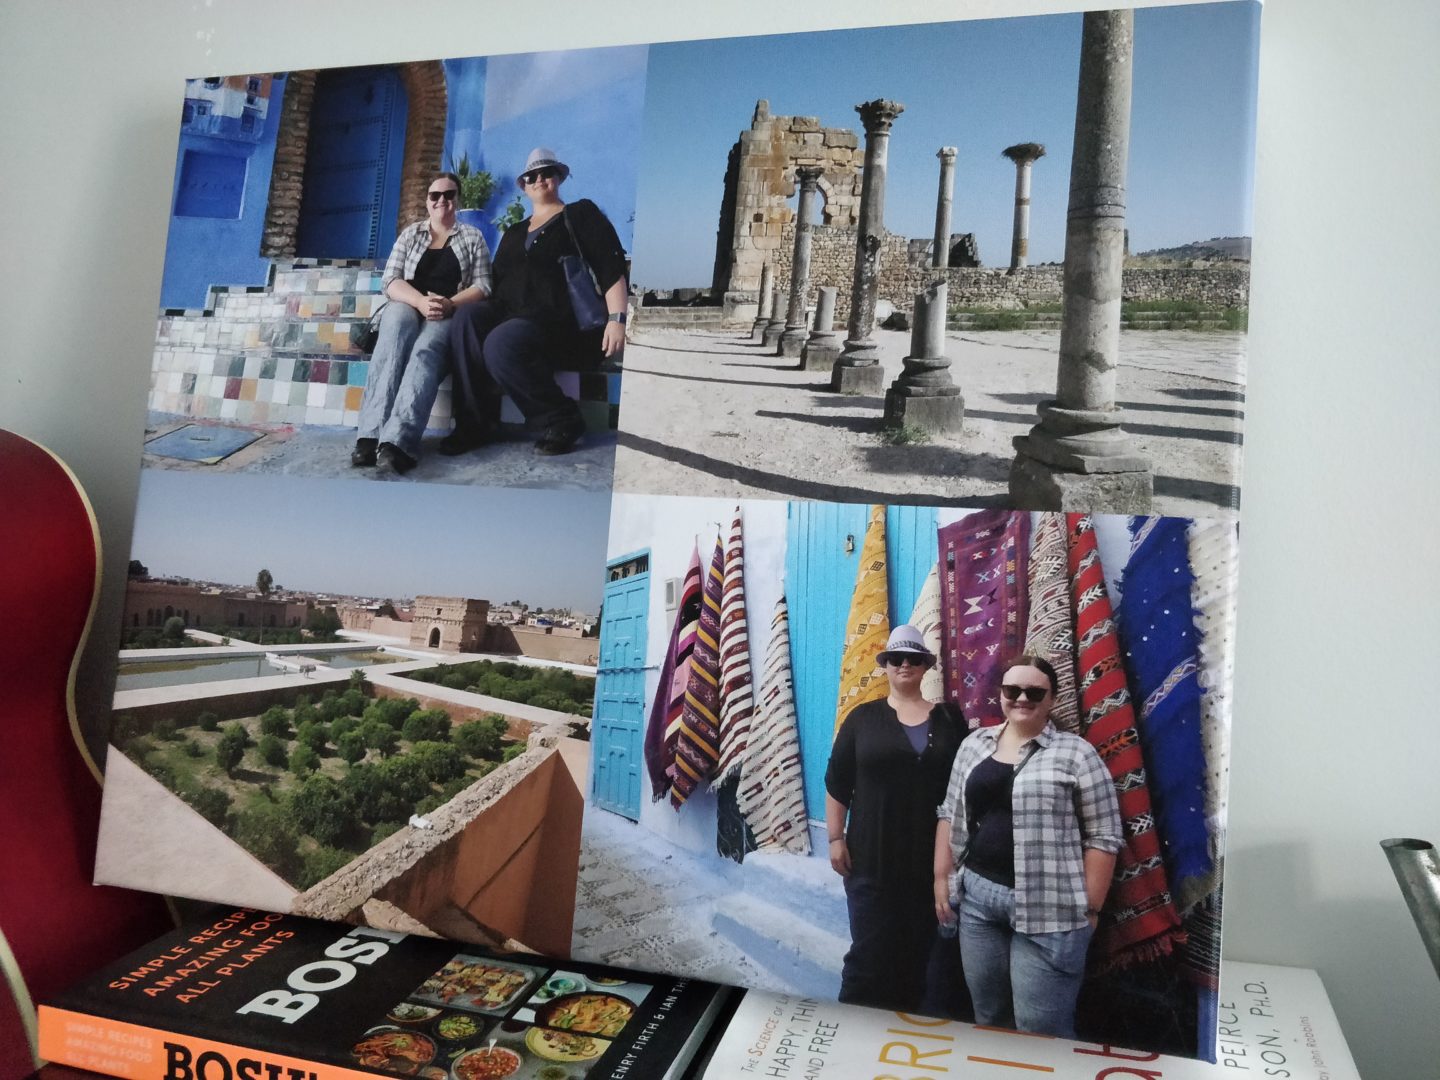 Tesco Photo Personalised Canvas with Travel Photos at Angle